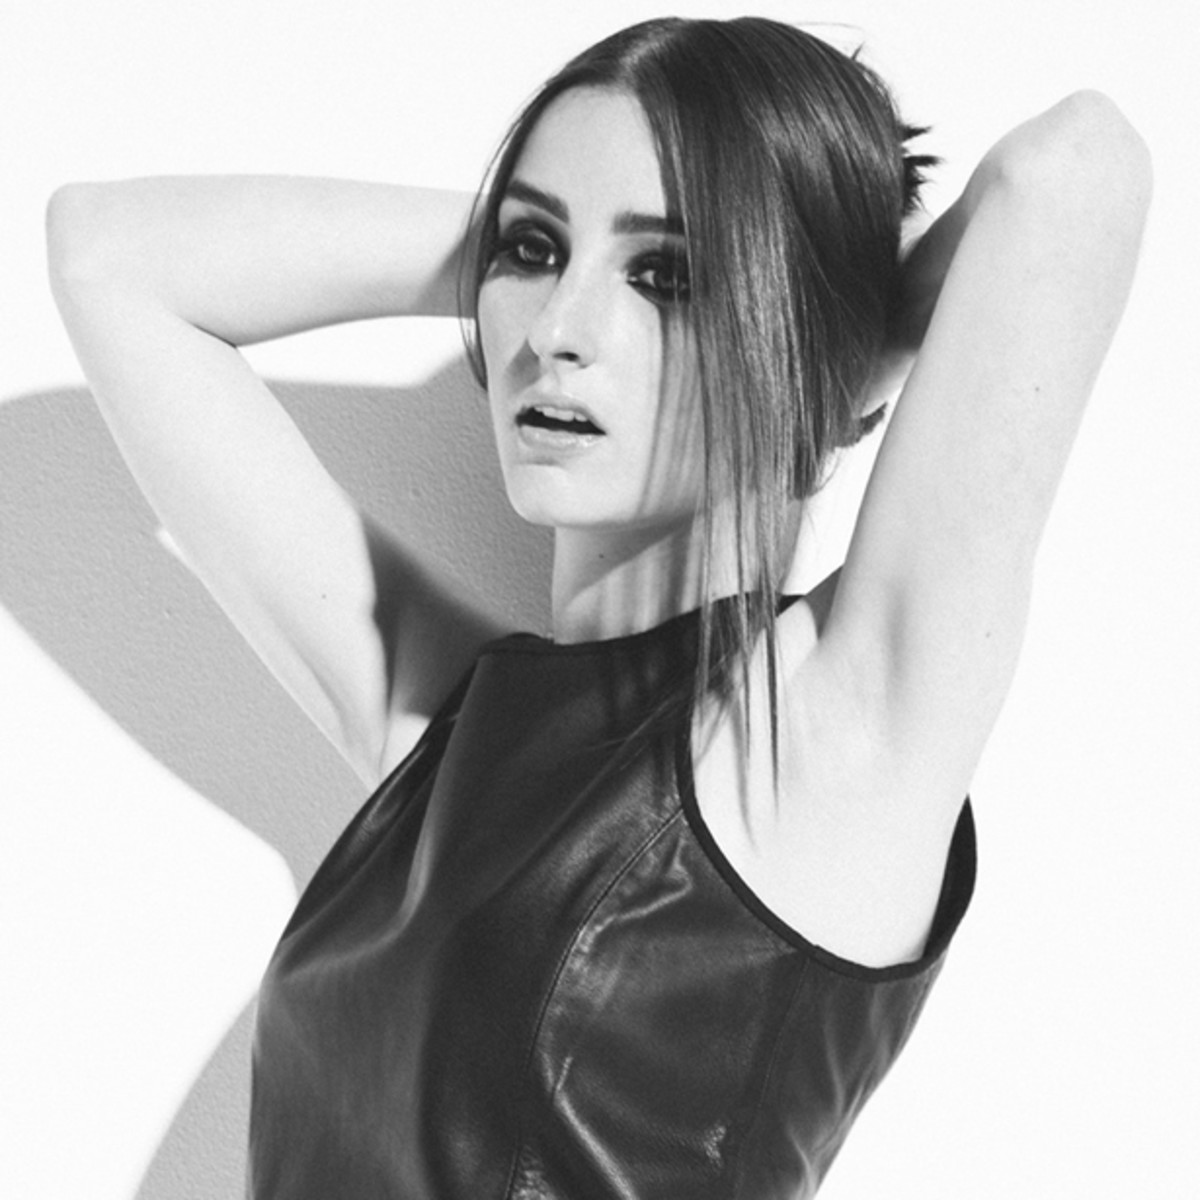 EDM Download: Banks - Waiting Game (daviDDann Remode); File Under 'Sultry Late Night House Music'